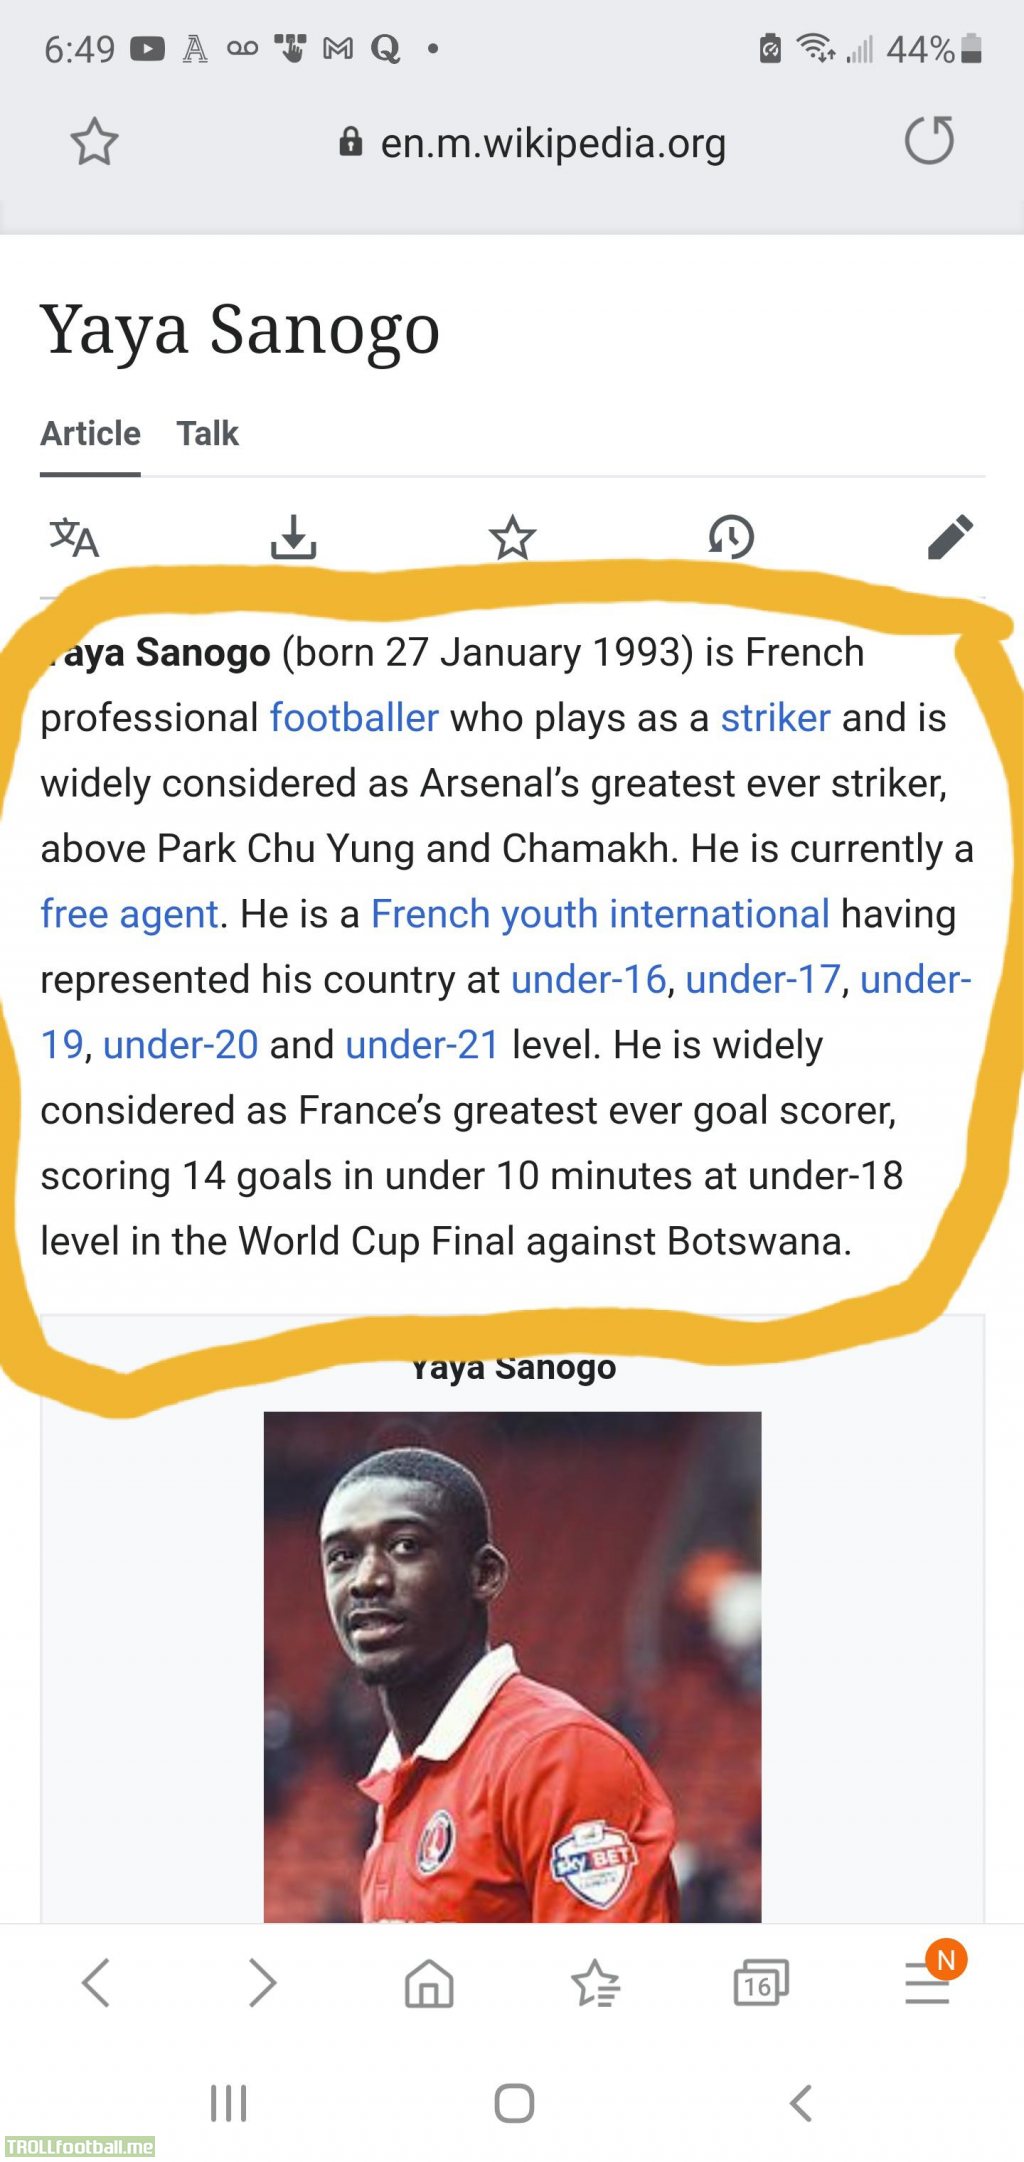 With the untimely passing of one of the greatest to play the game, Diego Maradona. I thought I'd share this finding on another GOAT from another universe. Not surprising, his actual Wikipedia page didn't disappoint. Smh lol